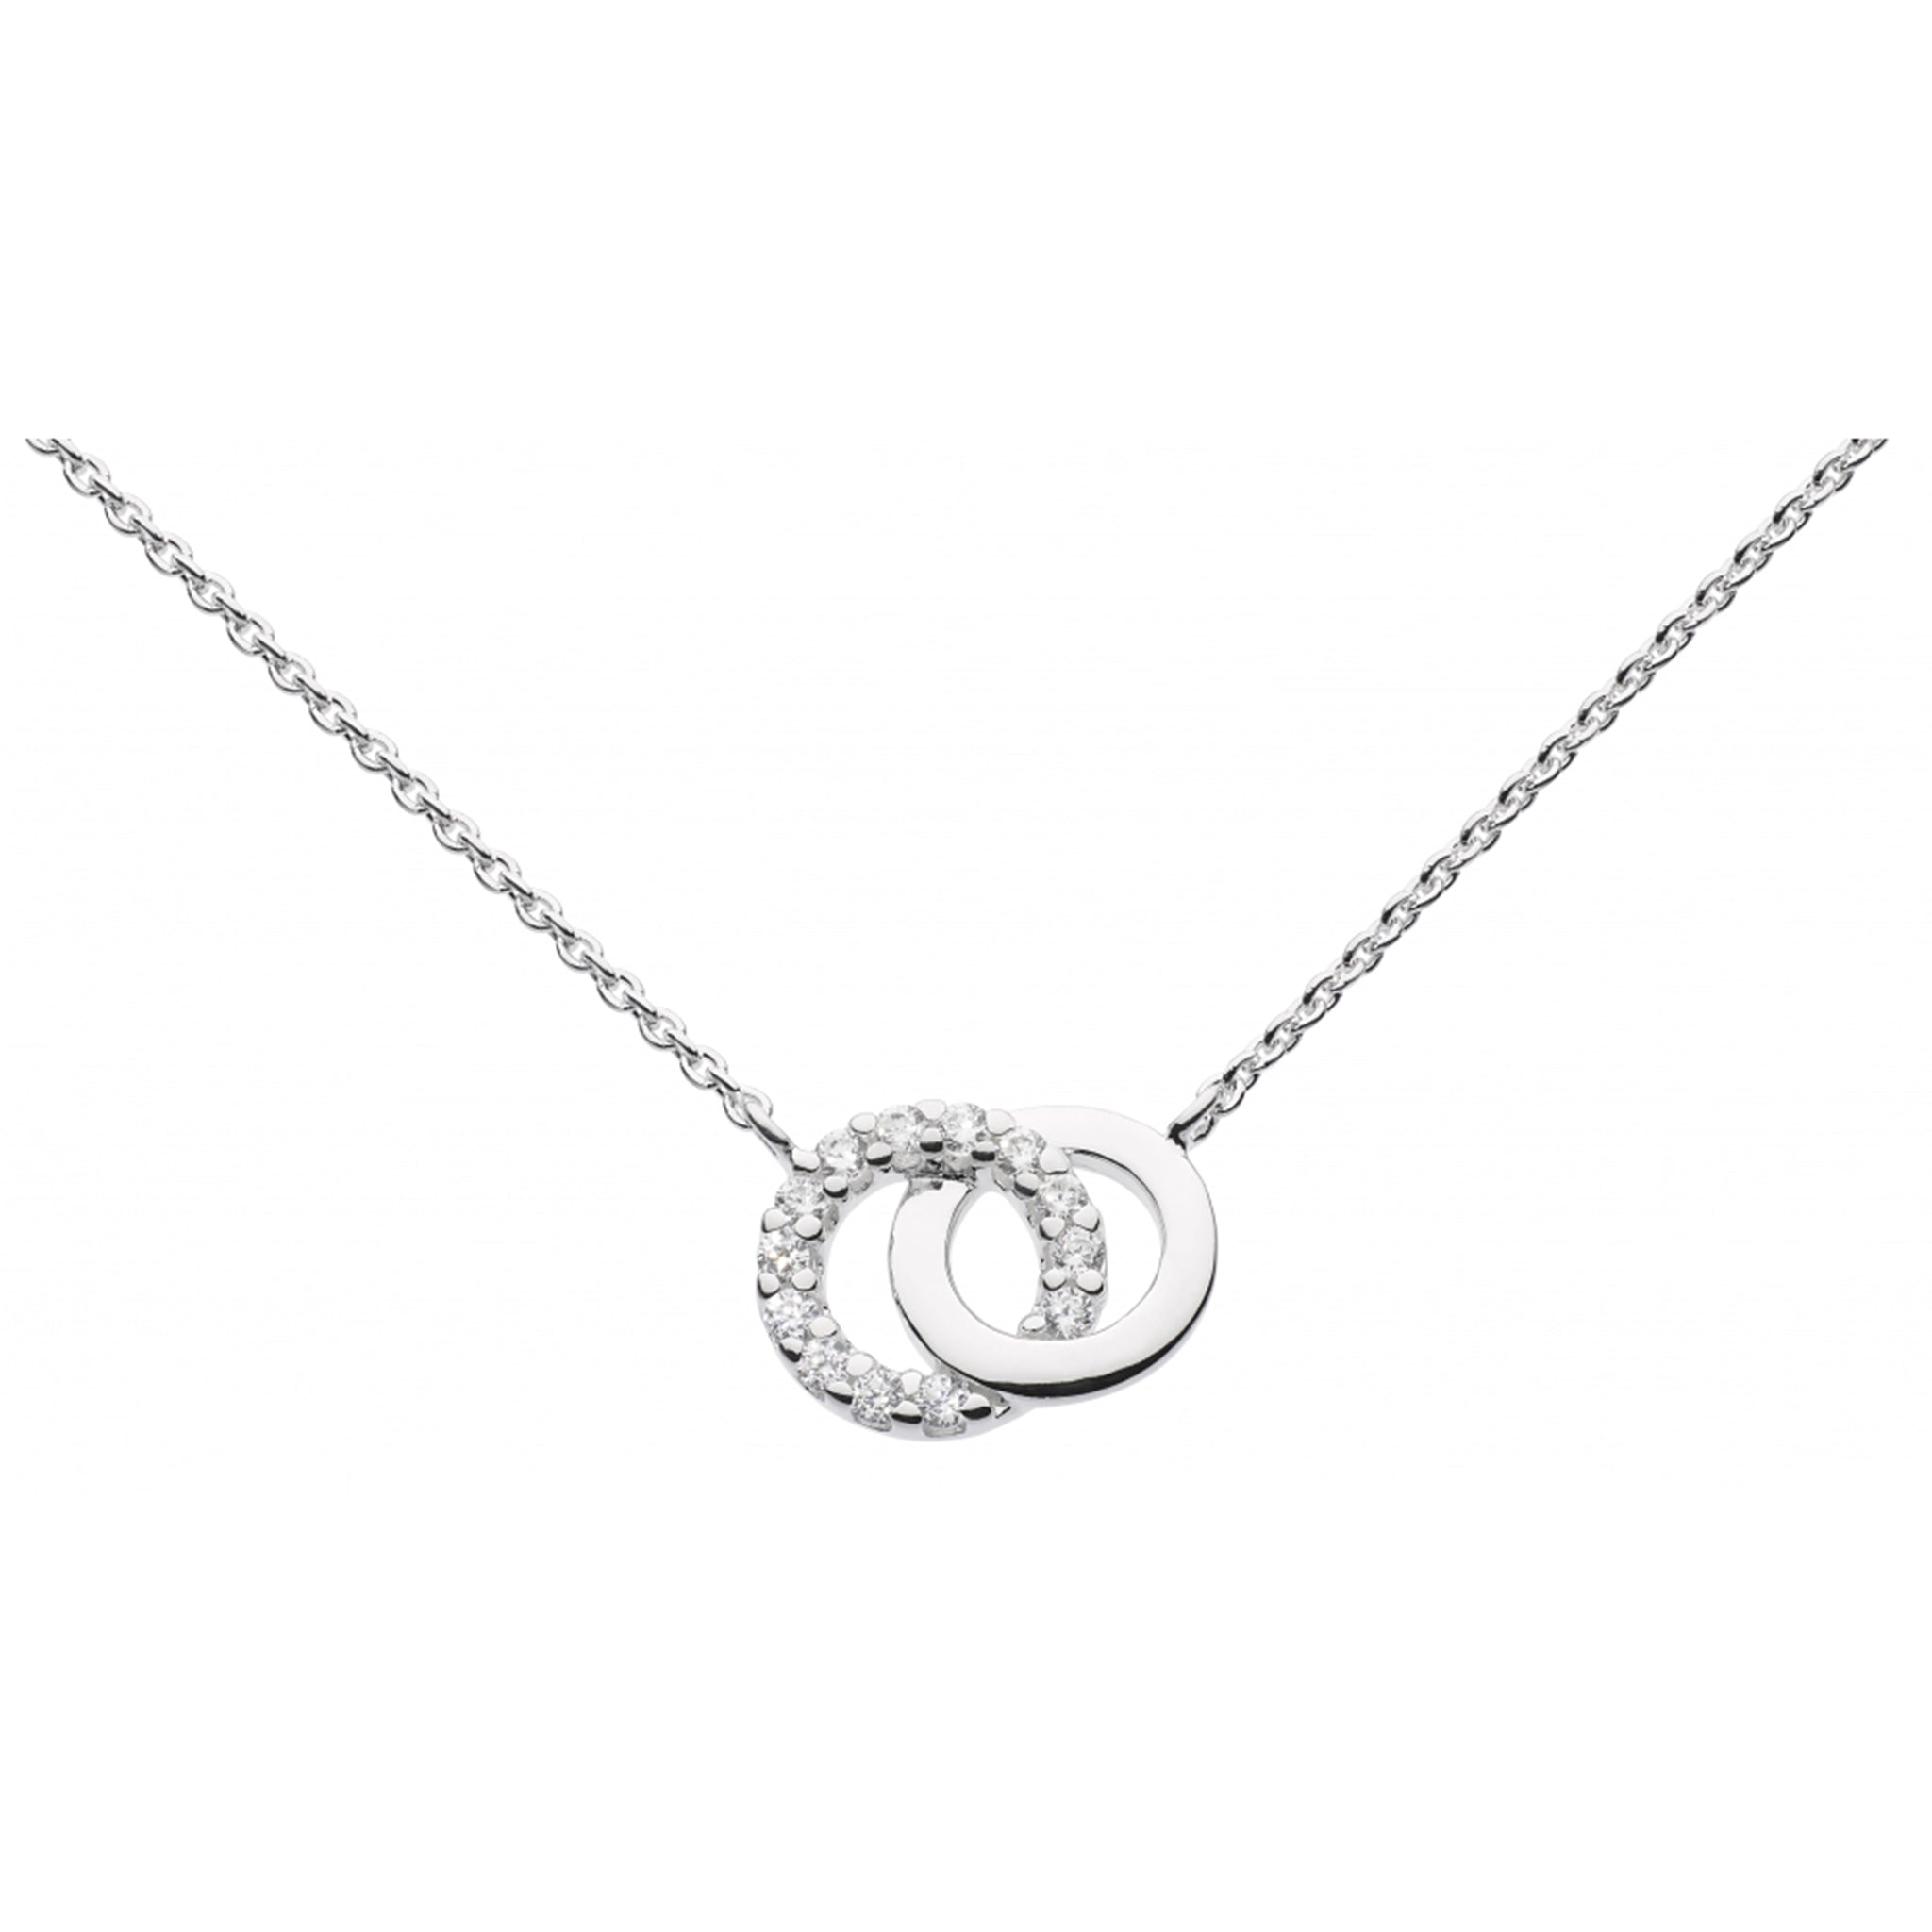 A necklace with two linked open circles in polished silver and CZ stones